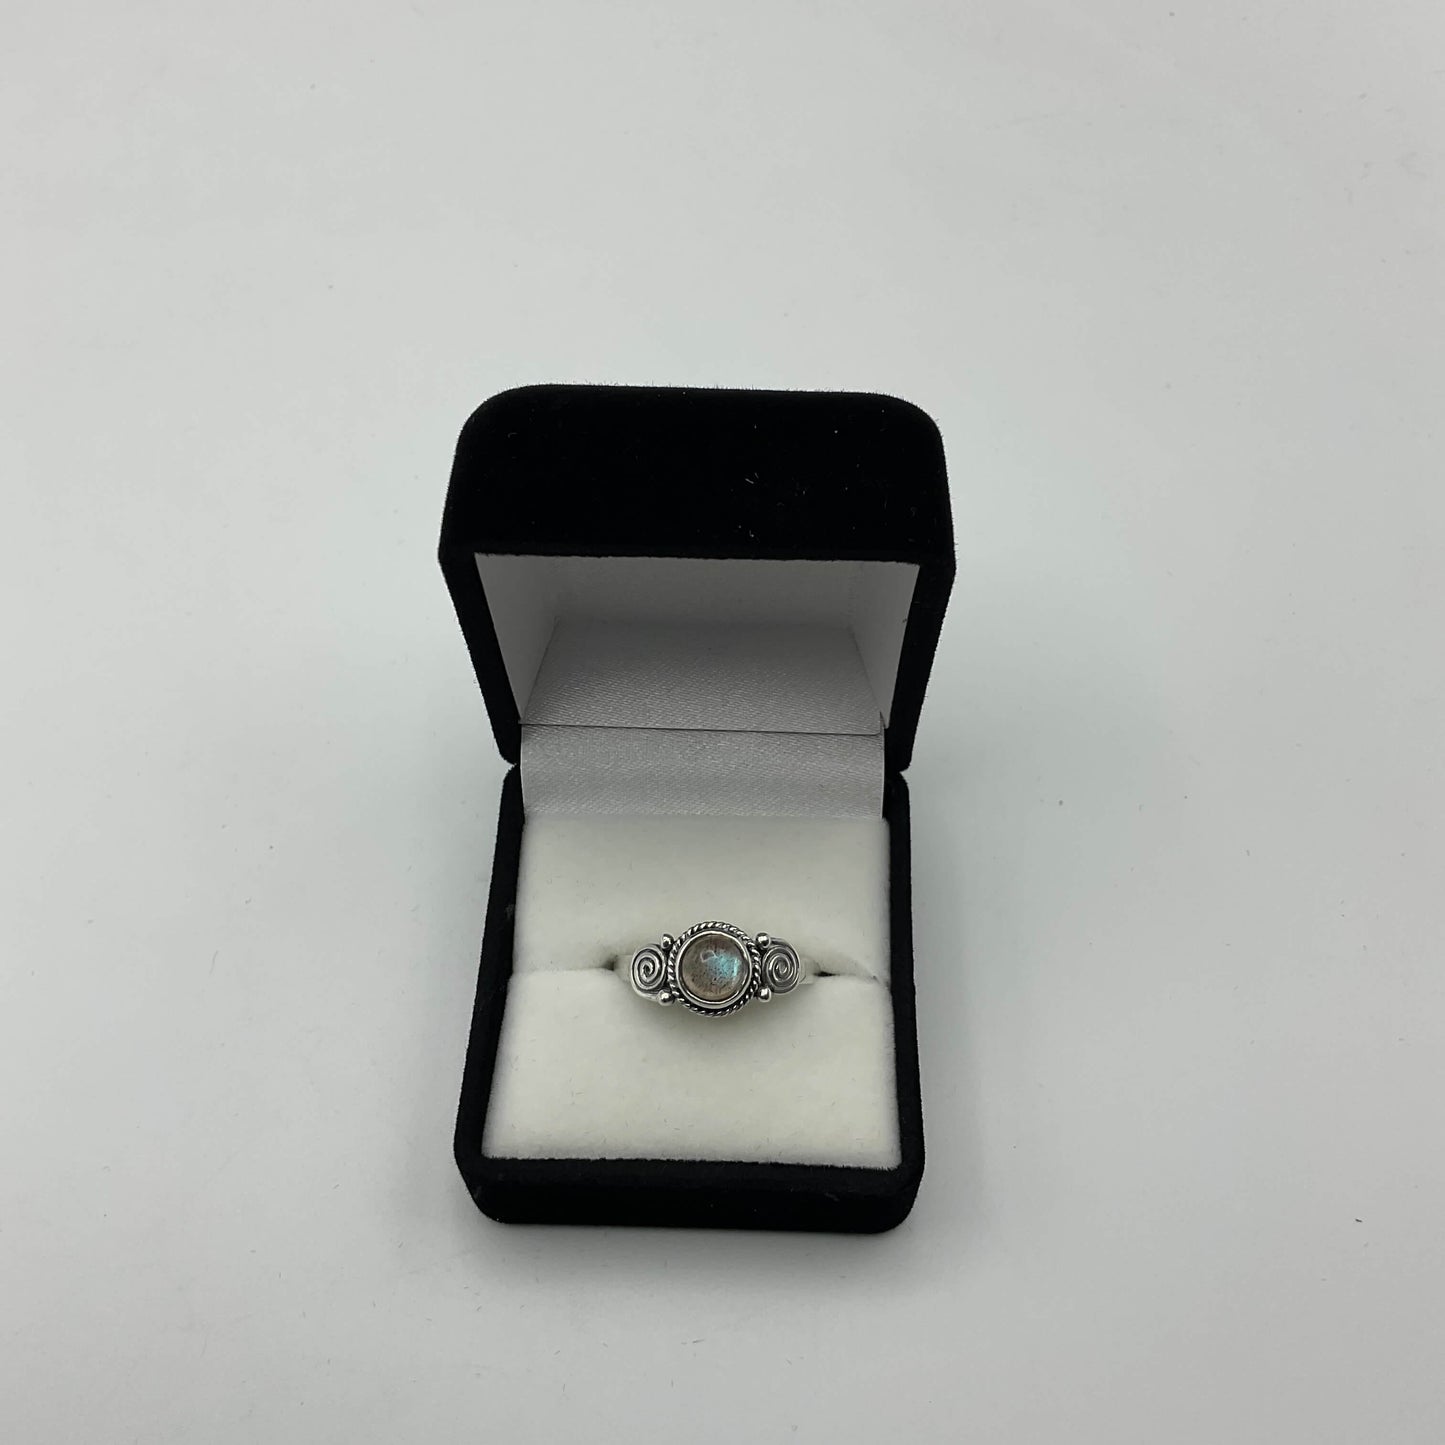 A moonstone silver ring in a presentation box